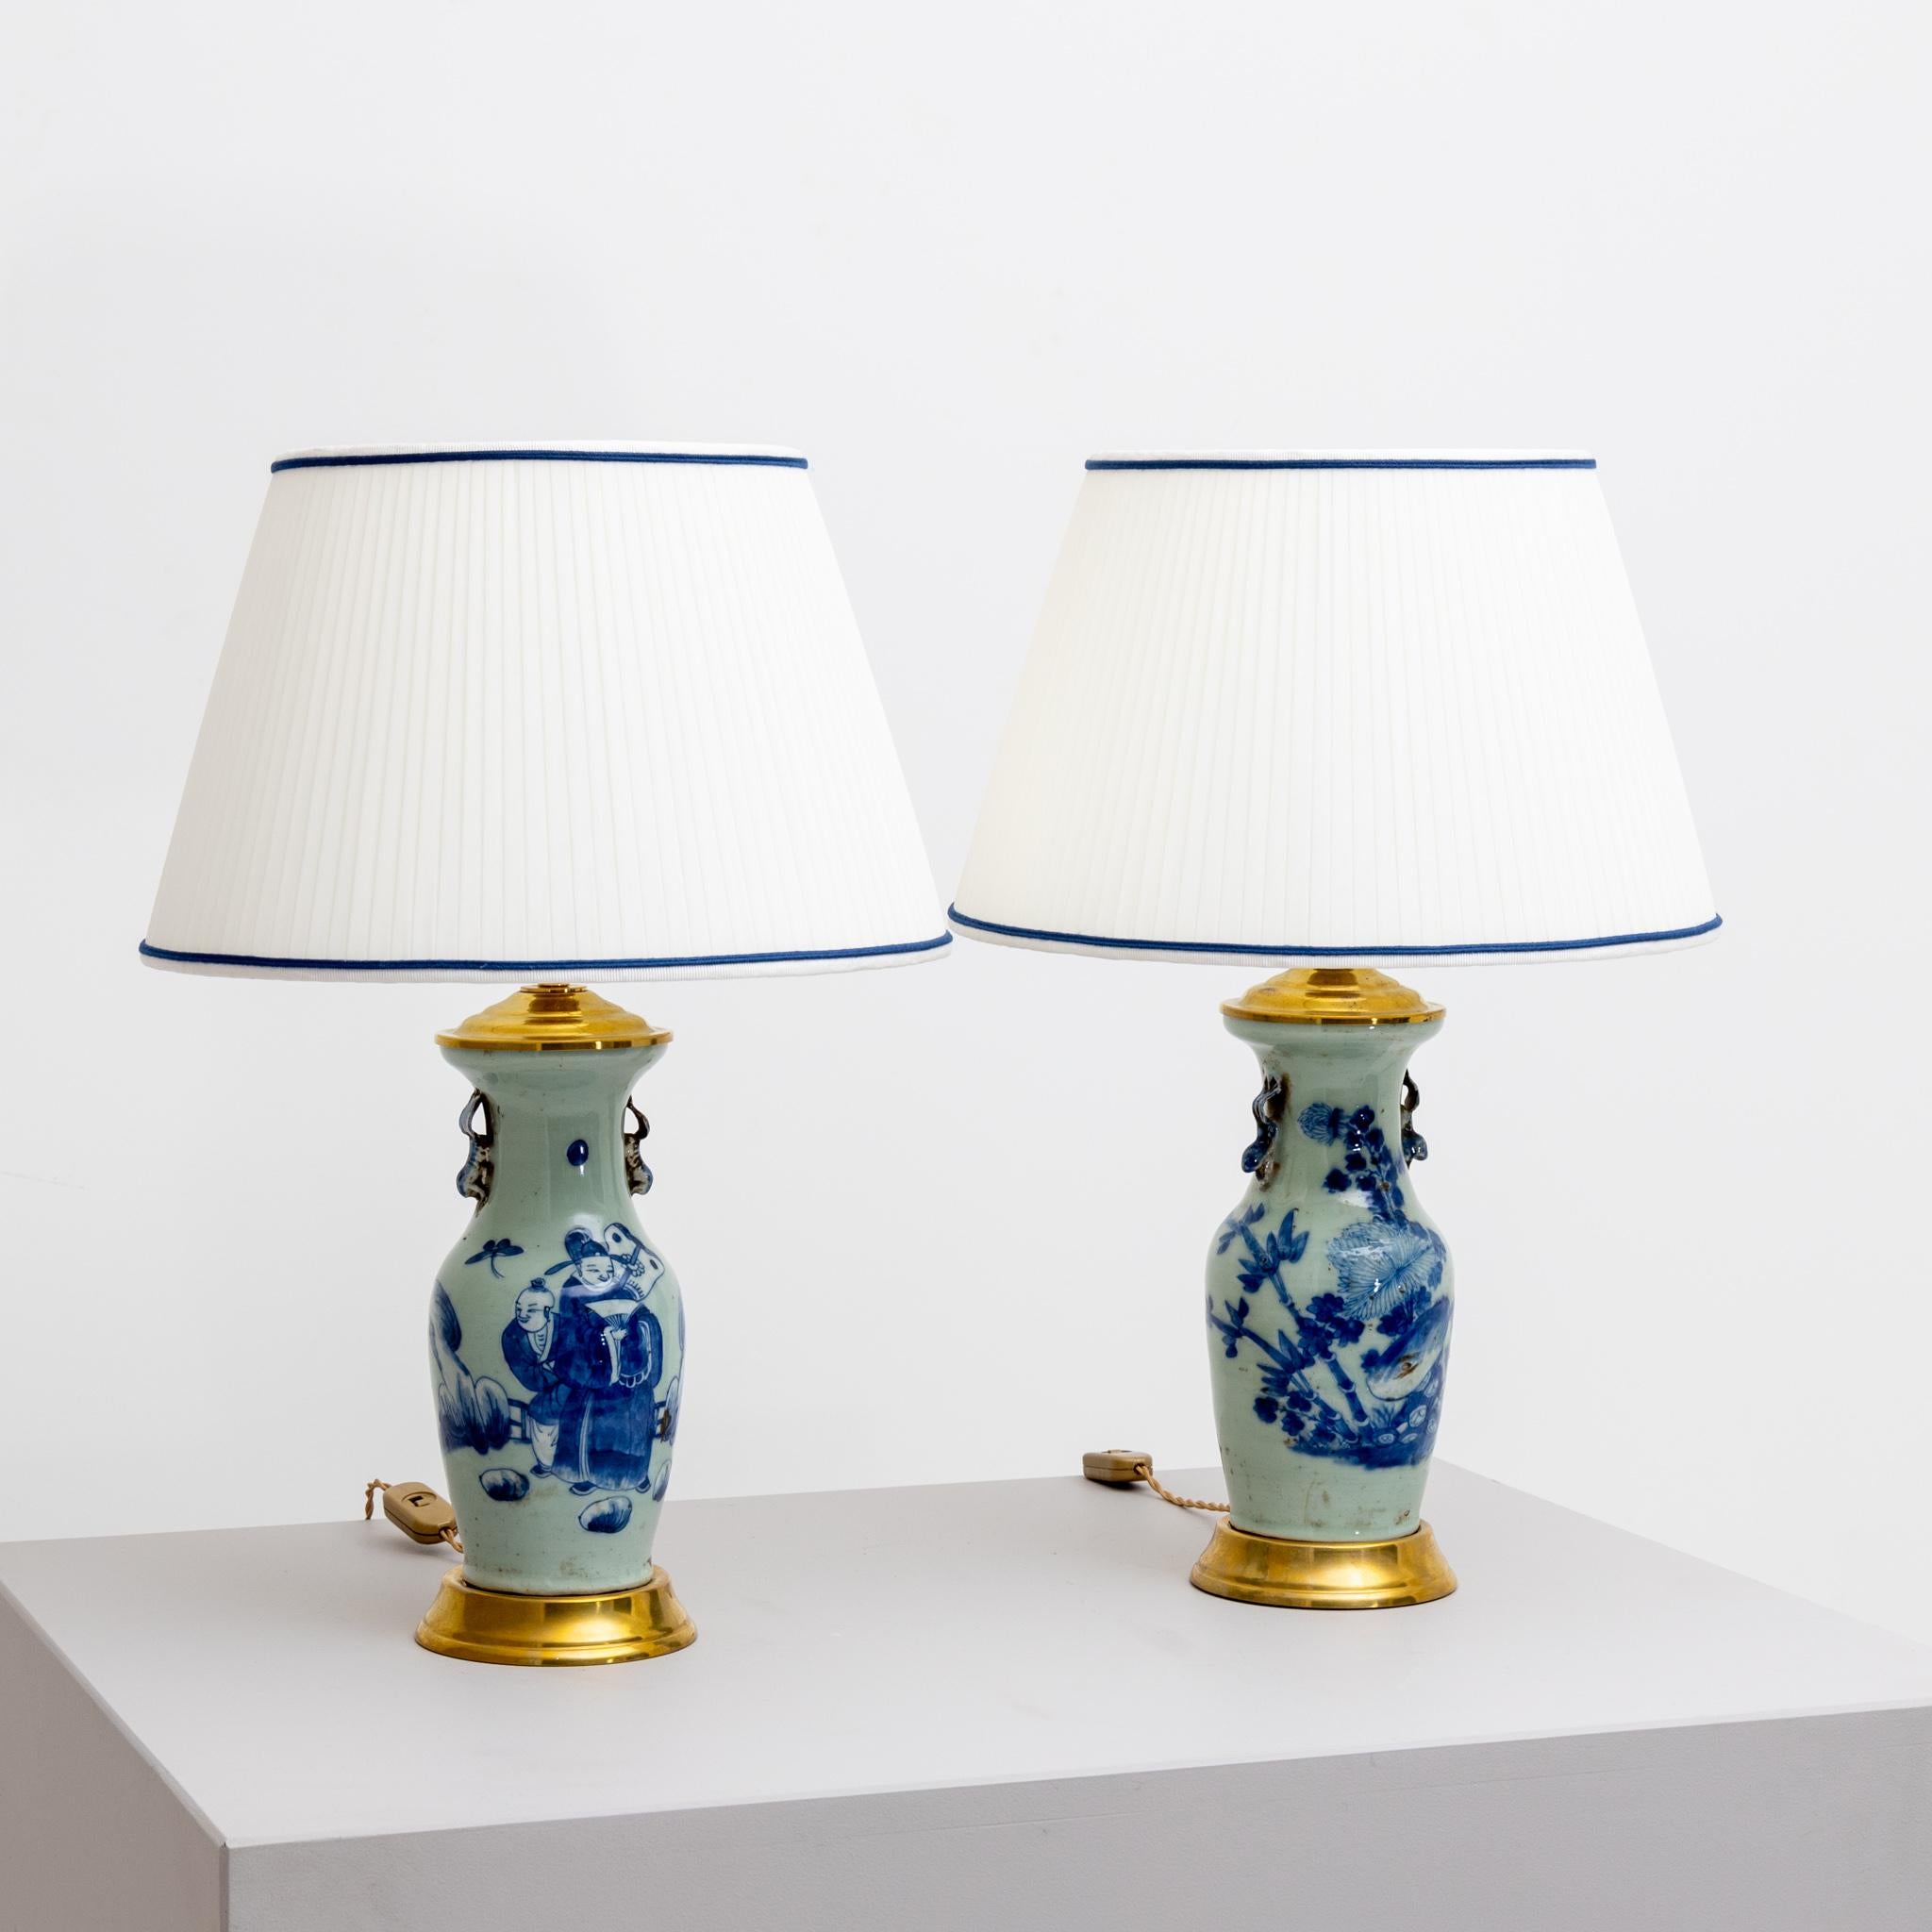 Pair of table lamps made of painted Chinese porcelain with celadon green underlay.